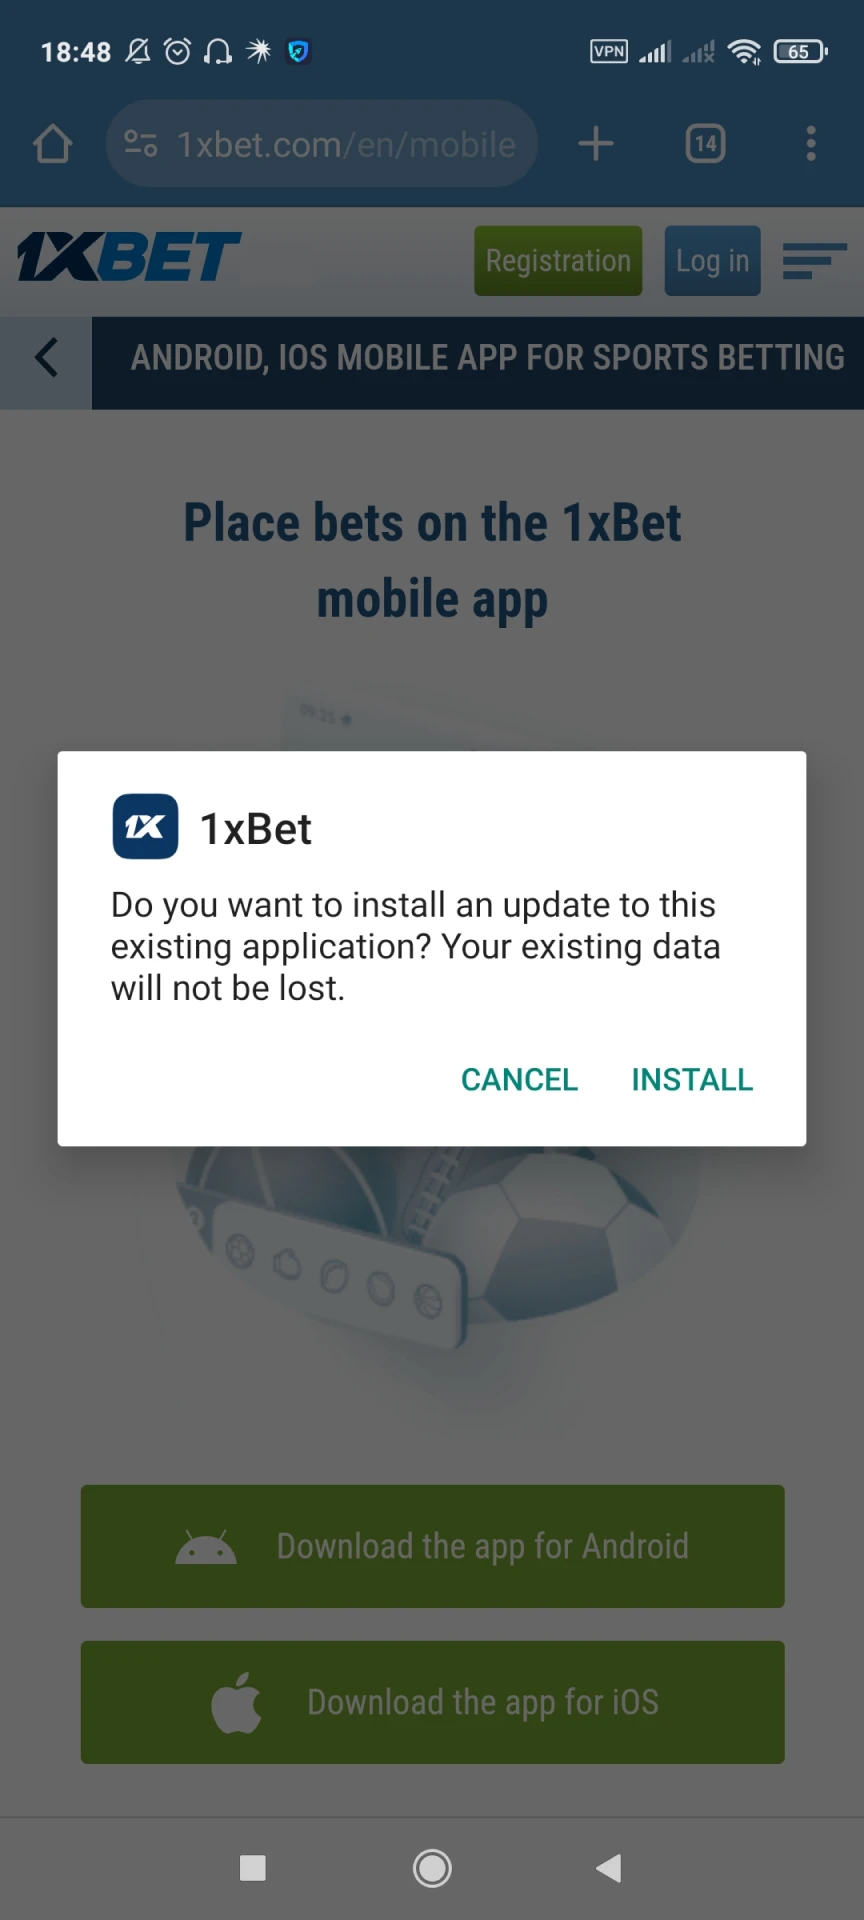 Start installing the 1xbet application for Android.